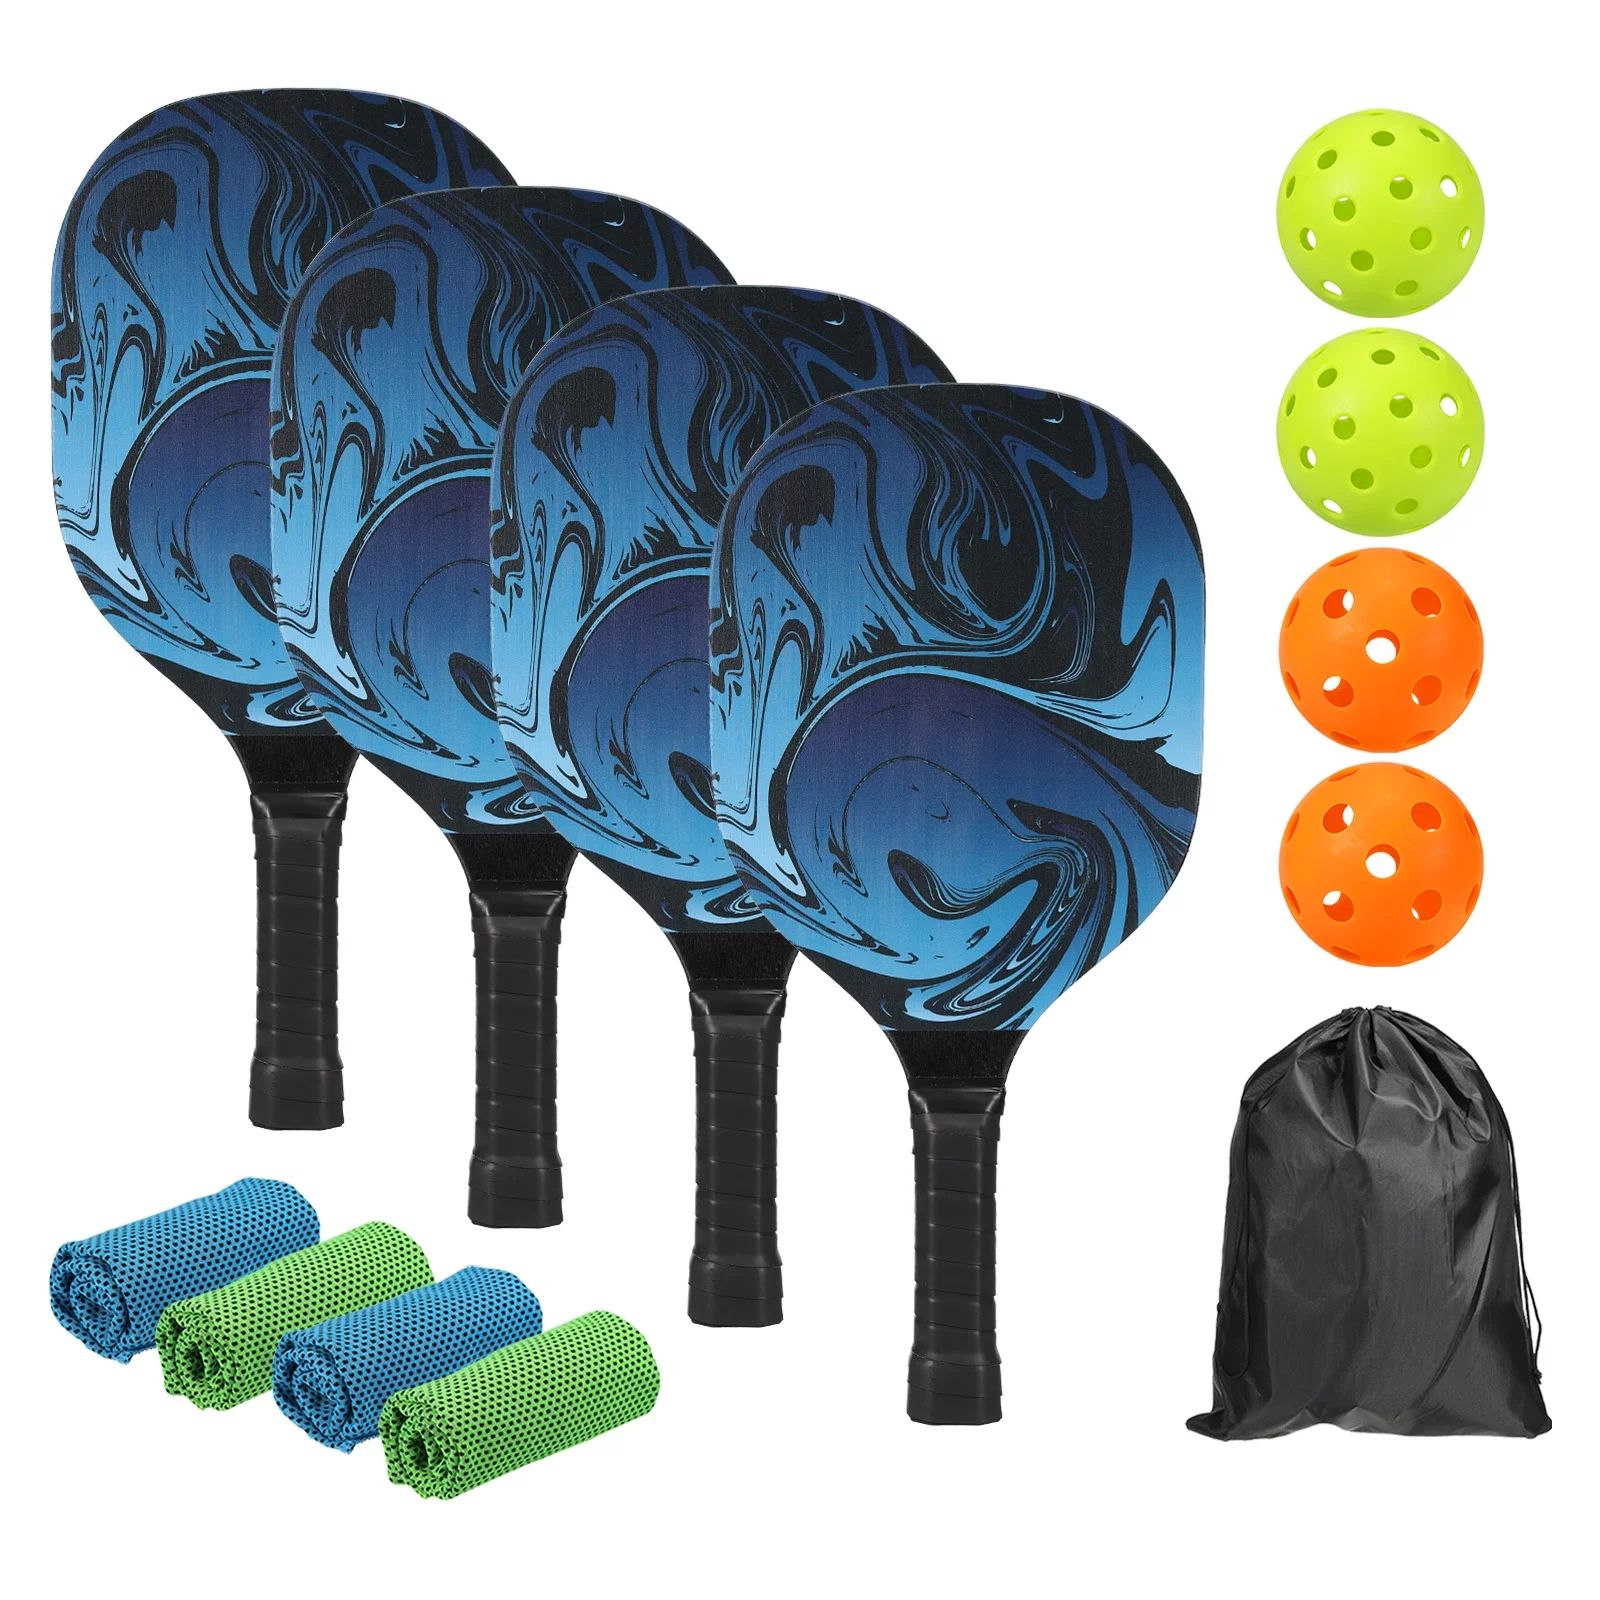 Unique Bargains Pickleball Paddles Set of 4 Basswood Pickleball Rackets with Cushion Grip | Walmart (US)